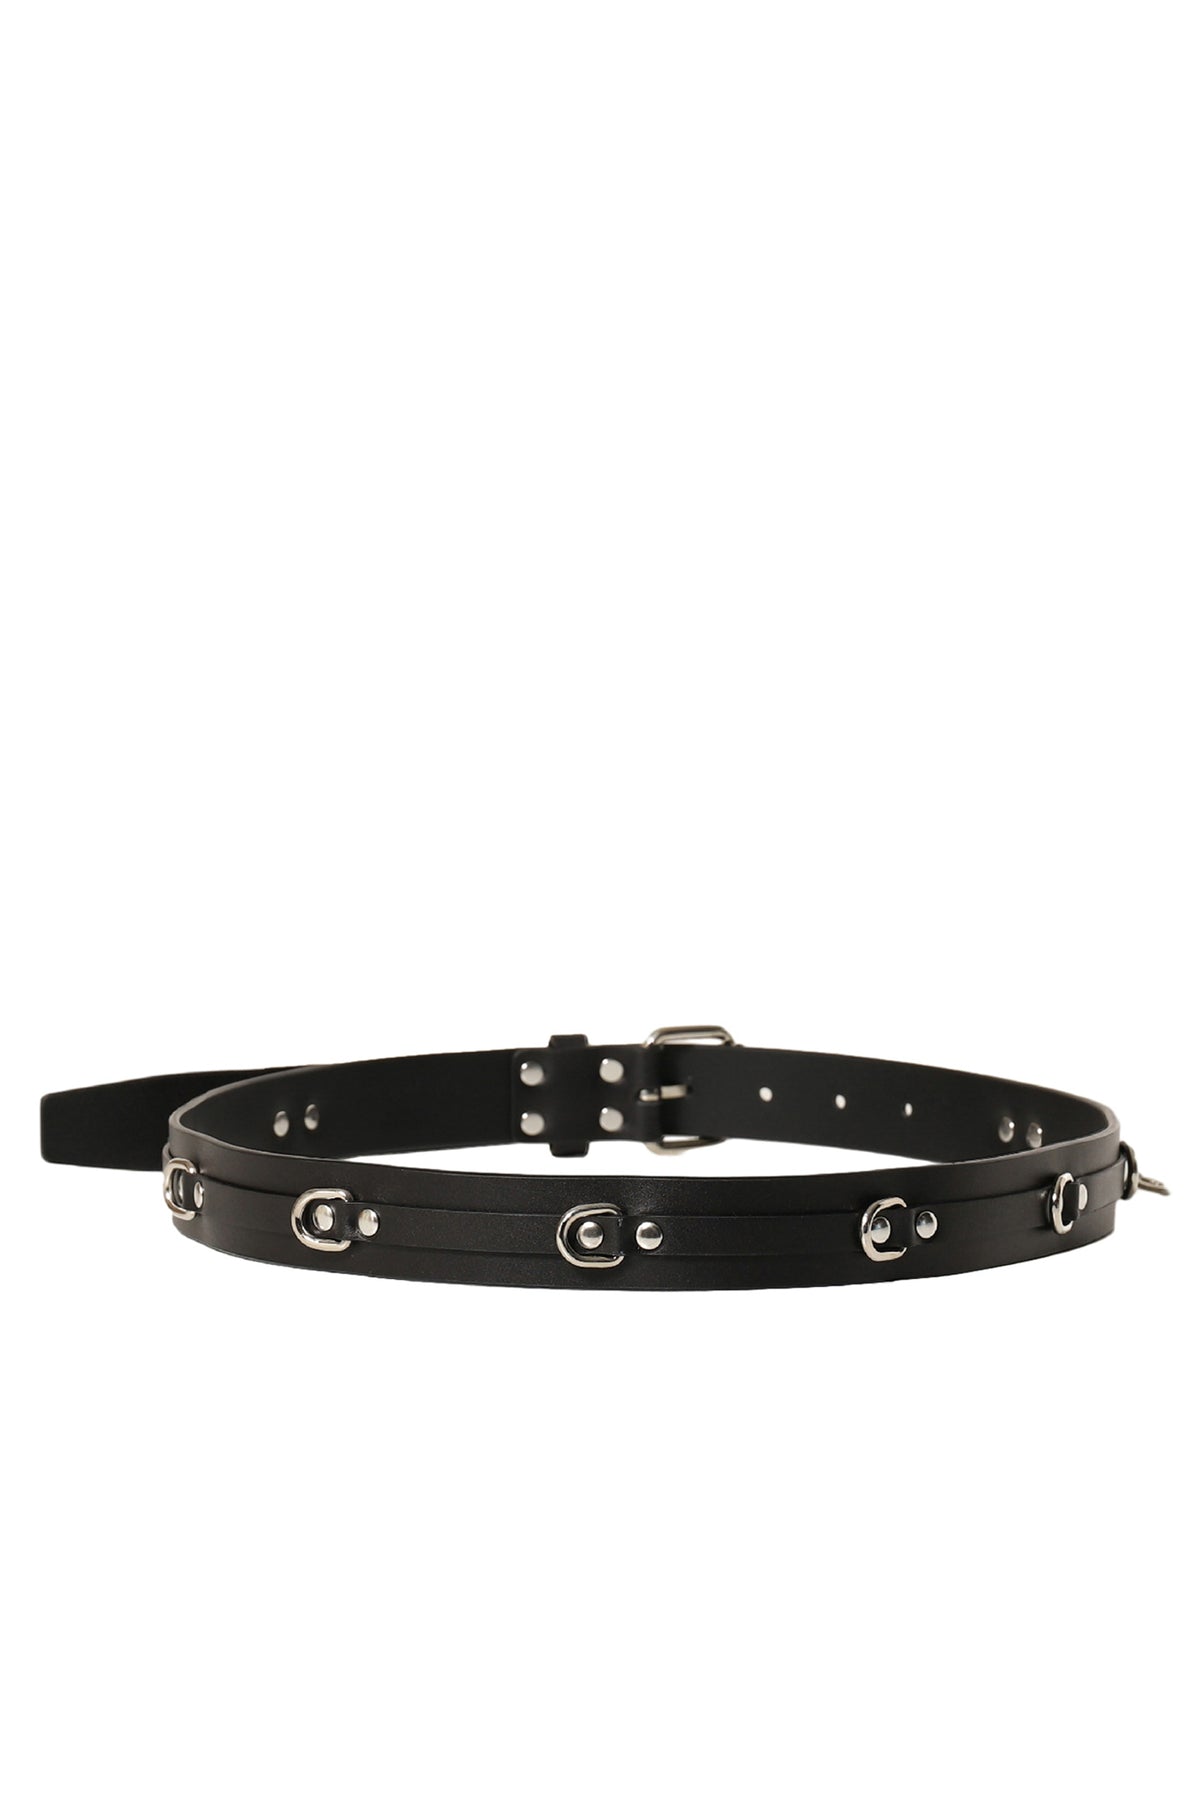 LEATHER BELT WITH METAL HARDWARE / BLK